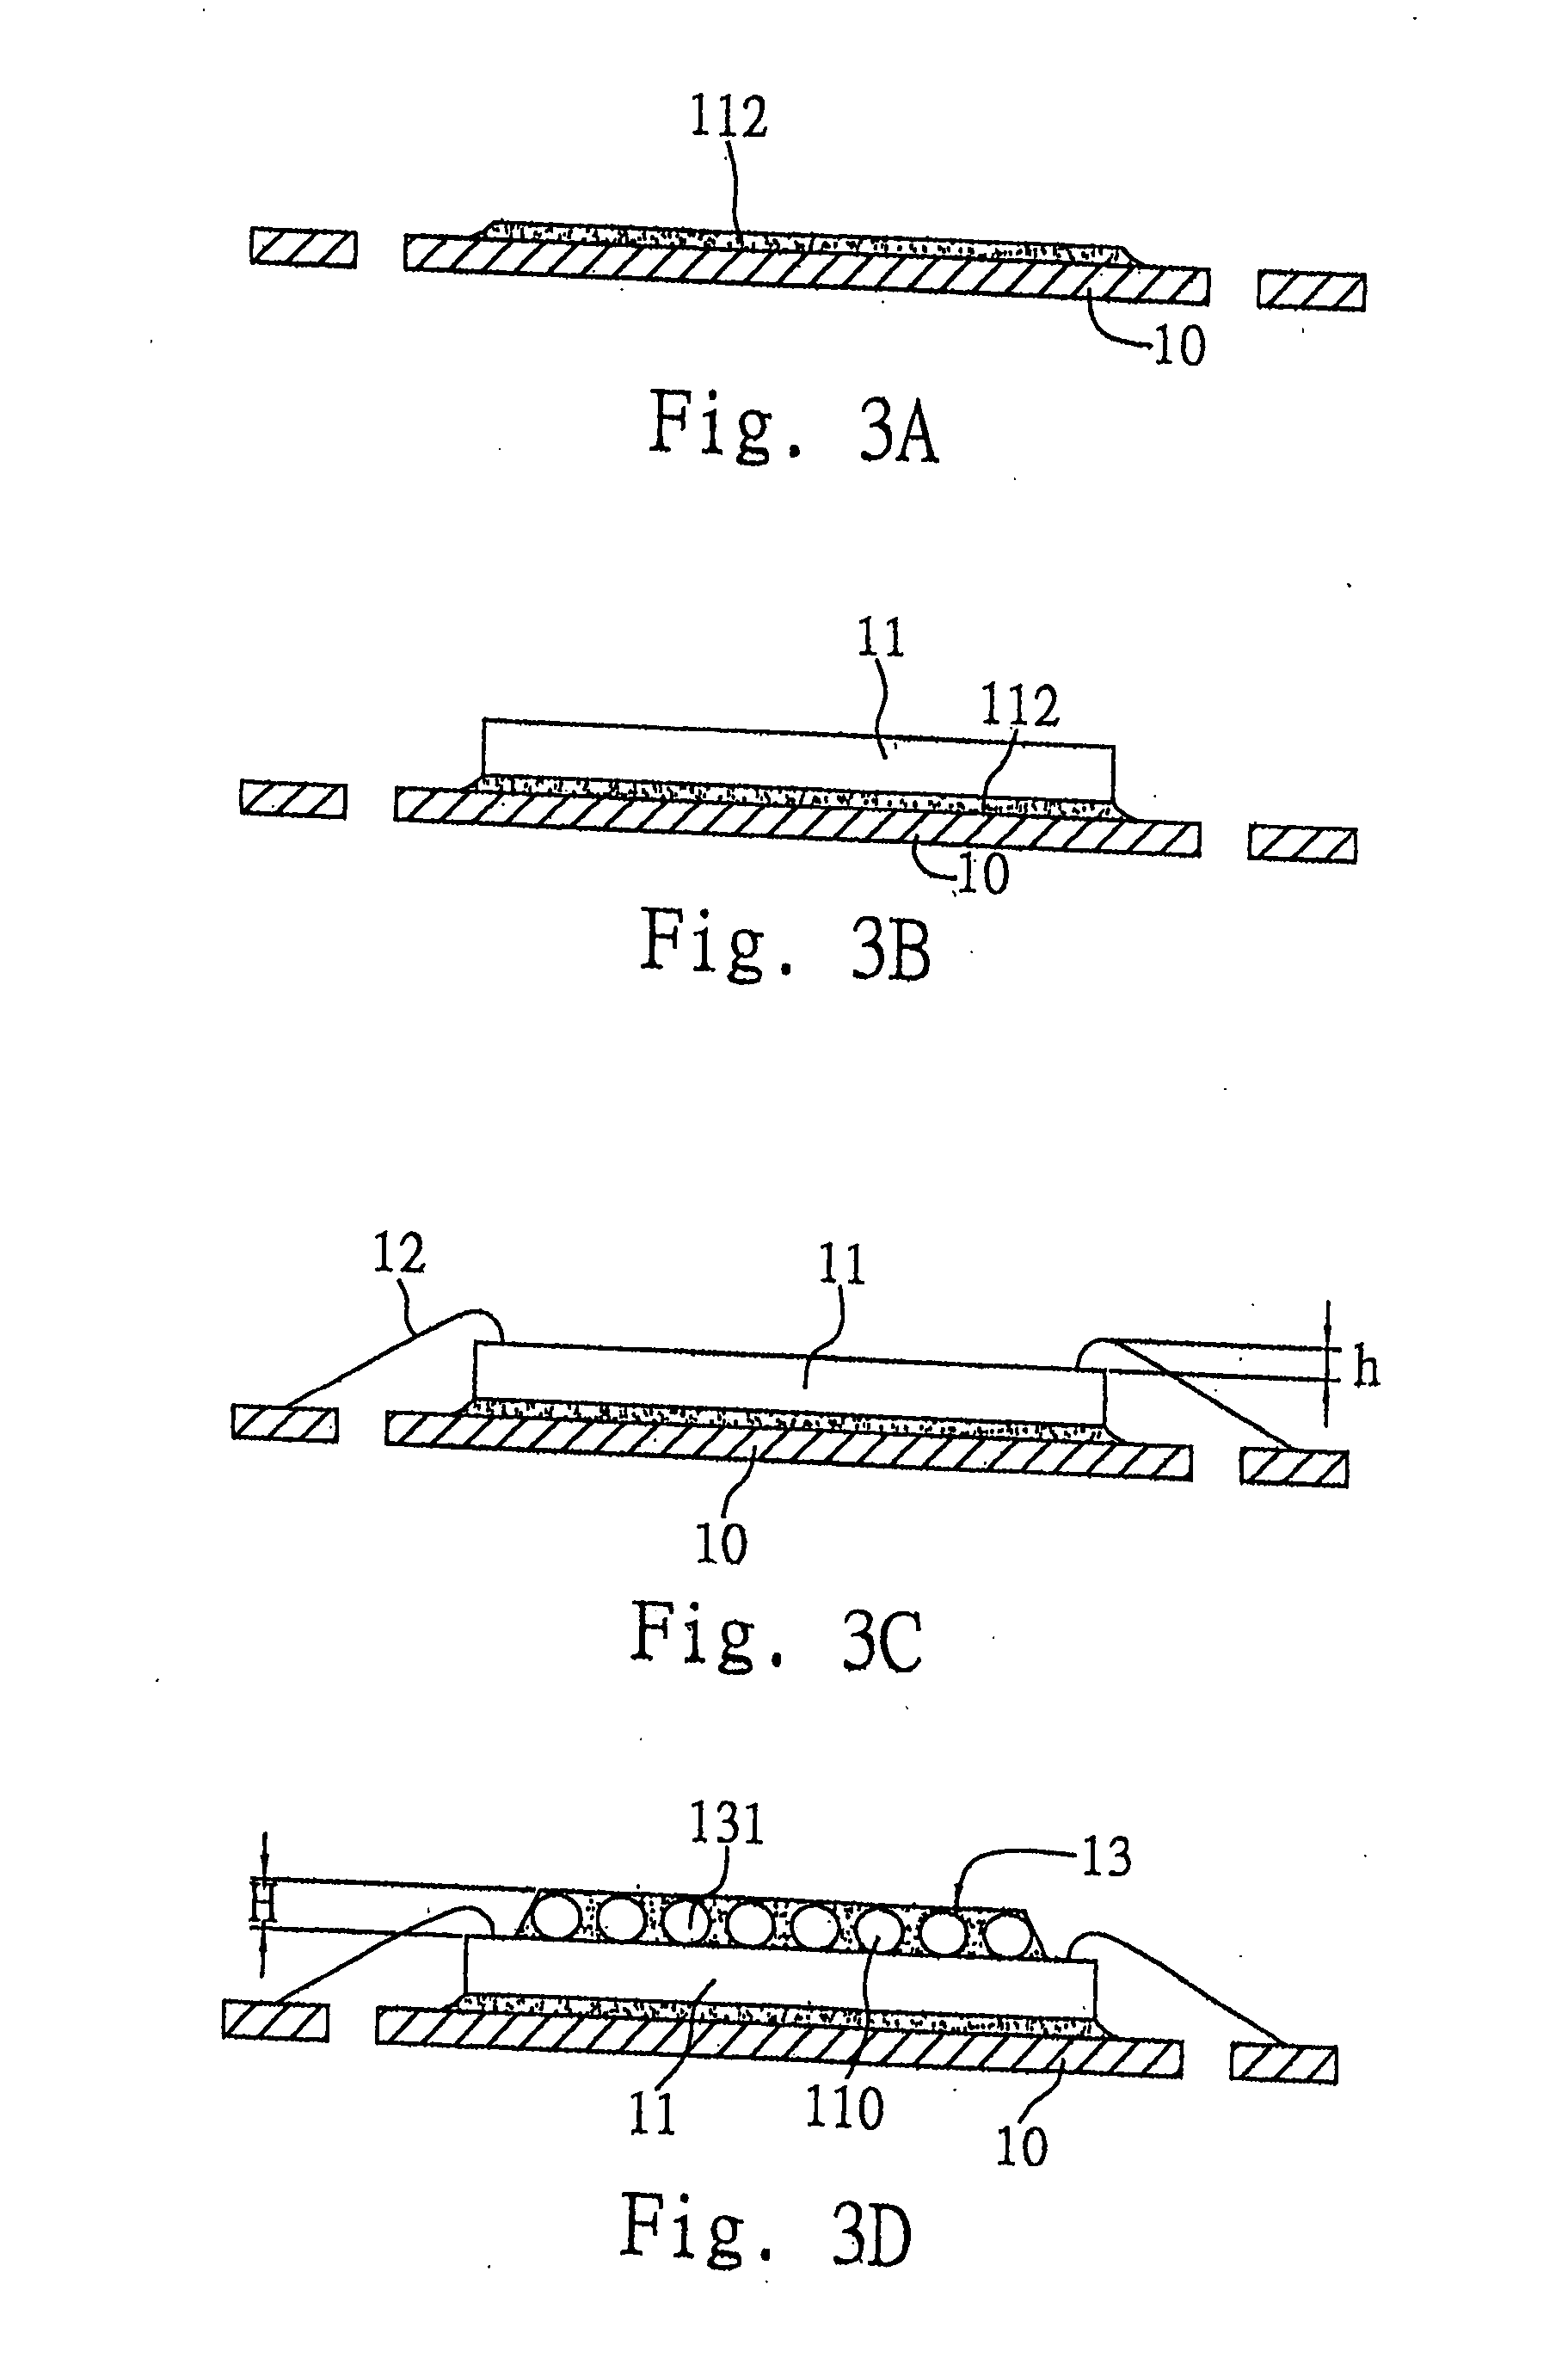 Manufacturing method for multichip module